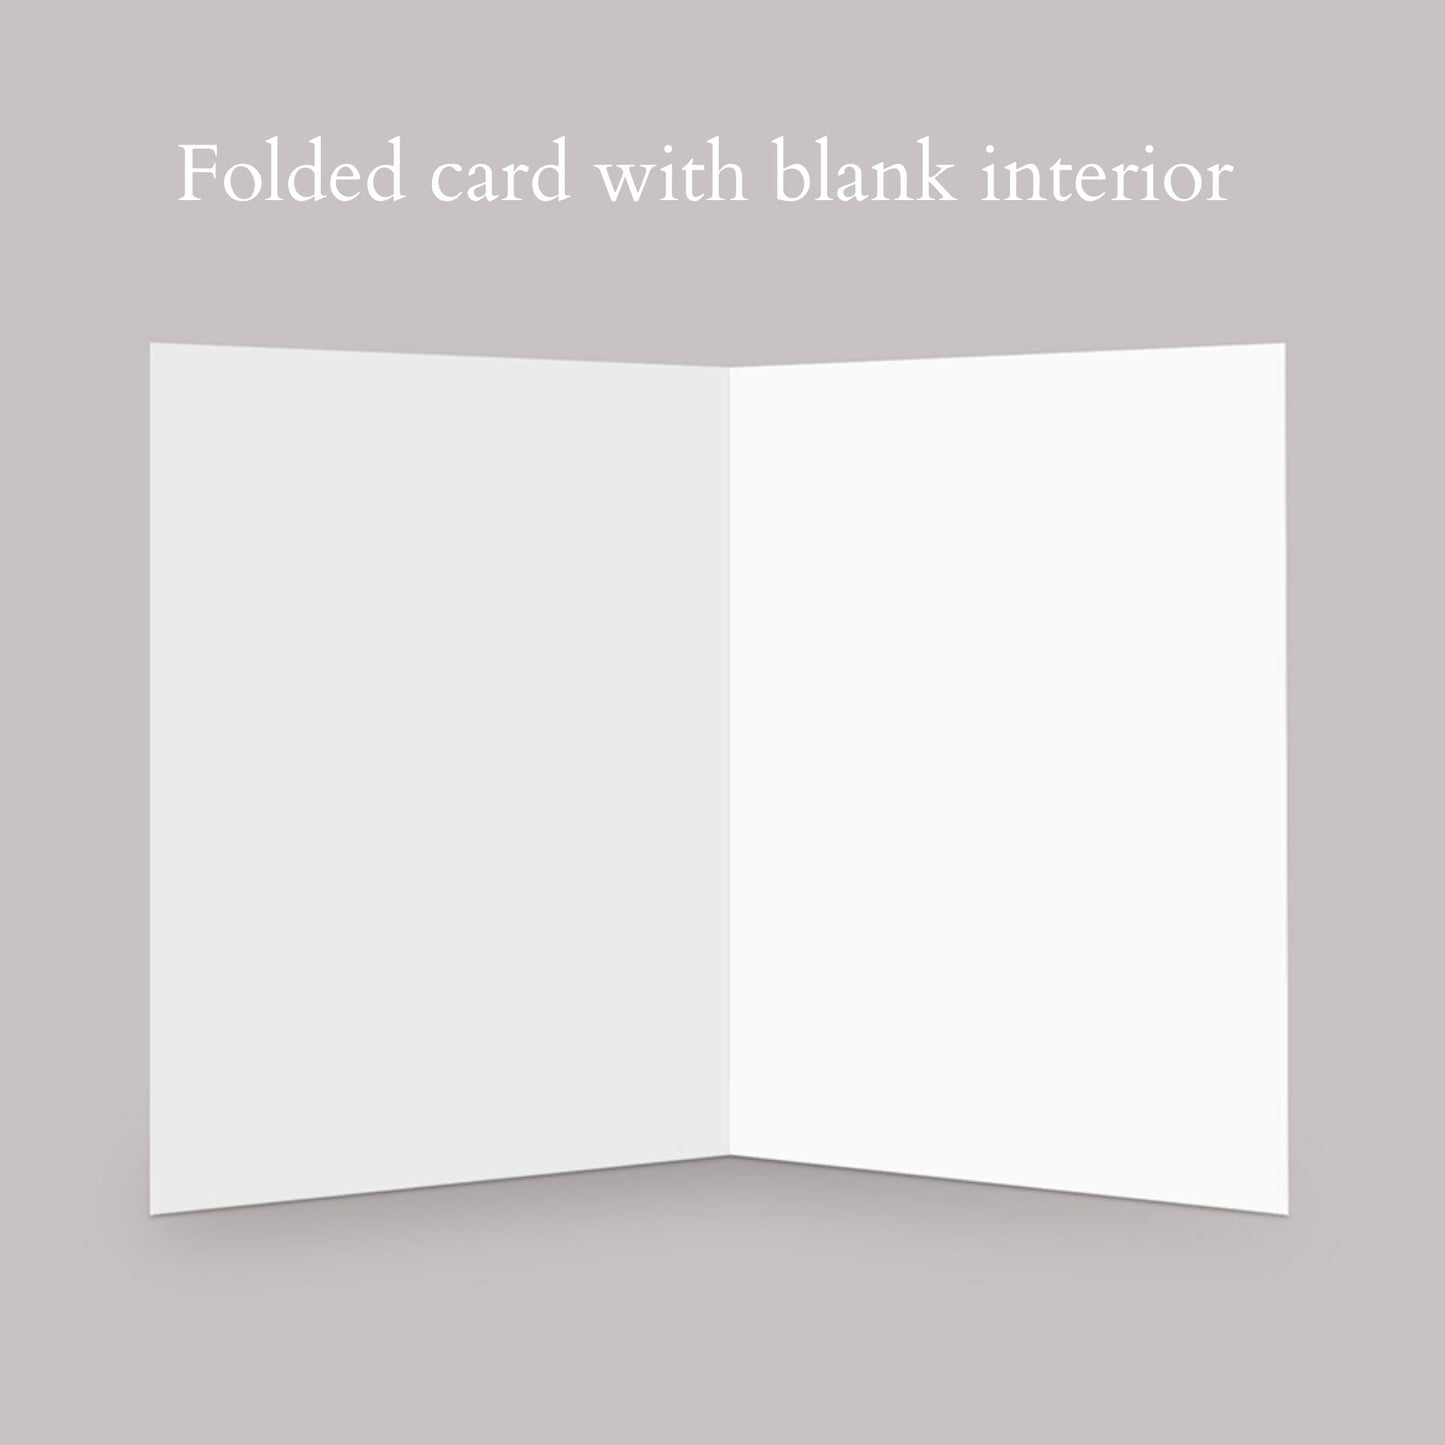 blank interior in the card so you have space to write a hand-written note.